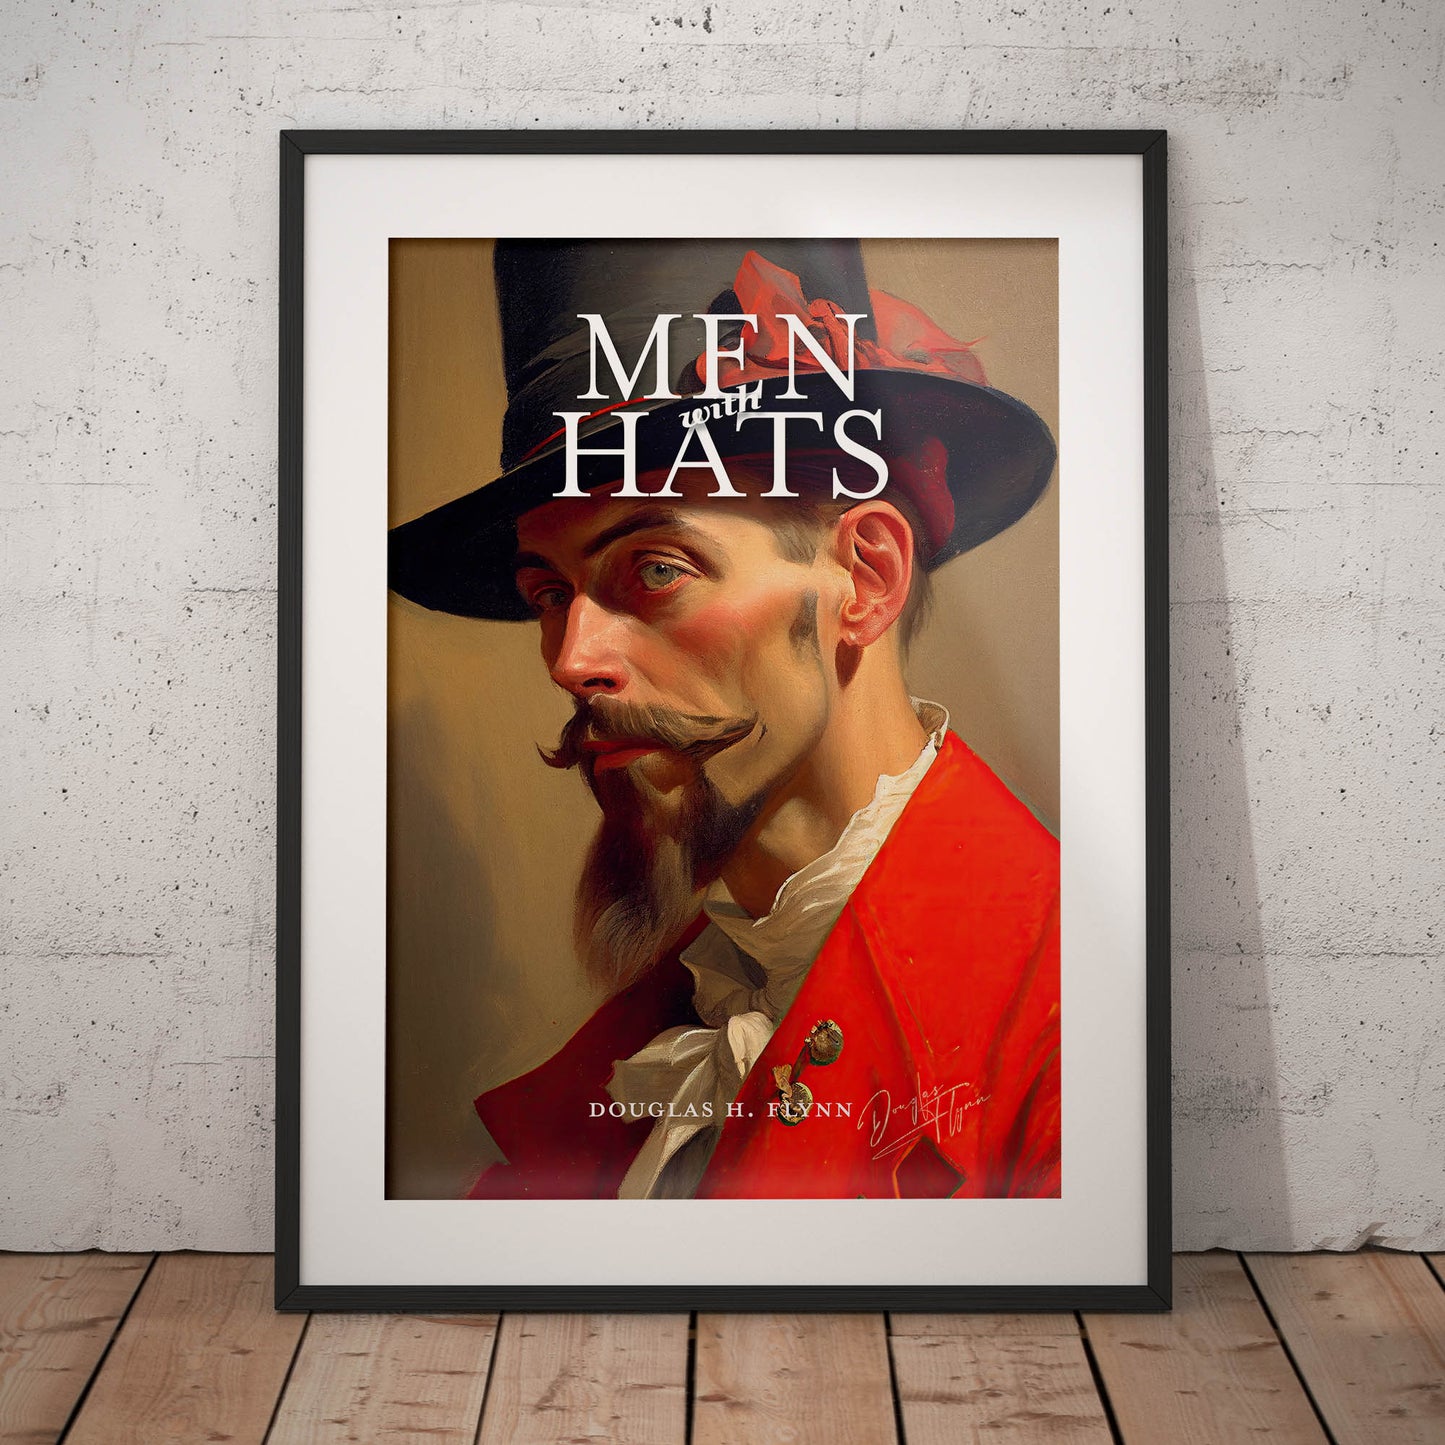 »Men With Hats« merch poster